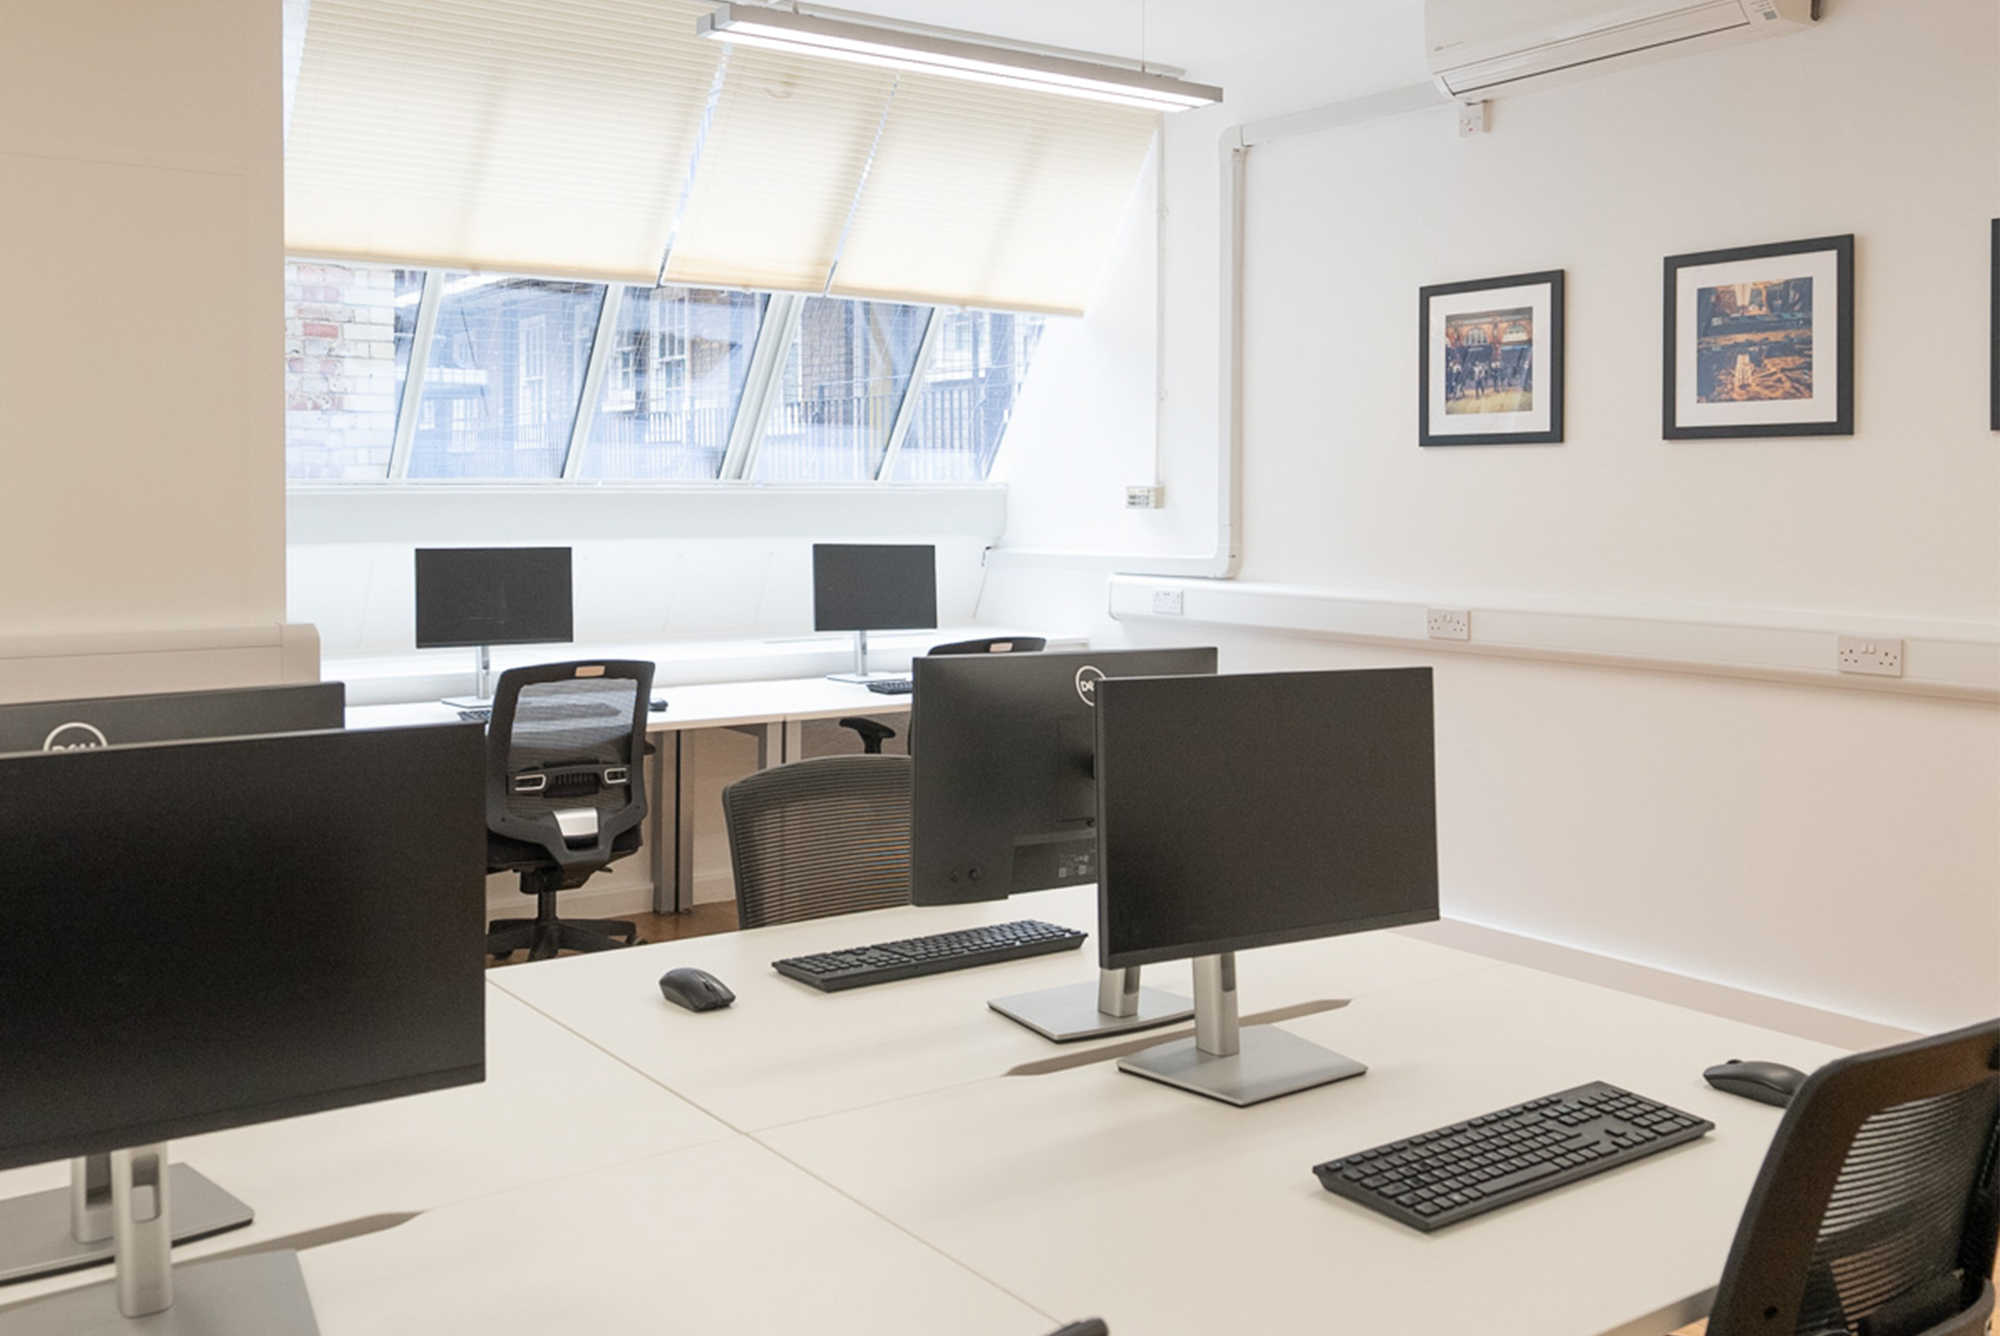 Serviced office with white desks, black operator chairs and windows with silver venetian blinds.